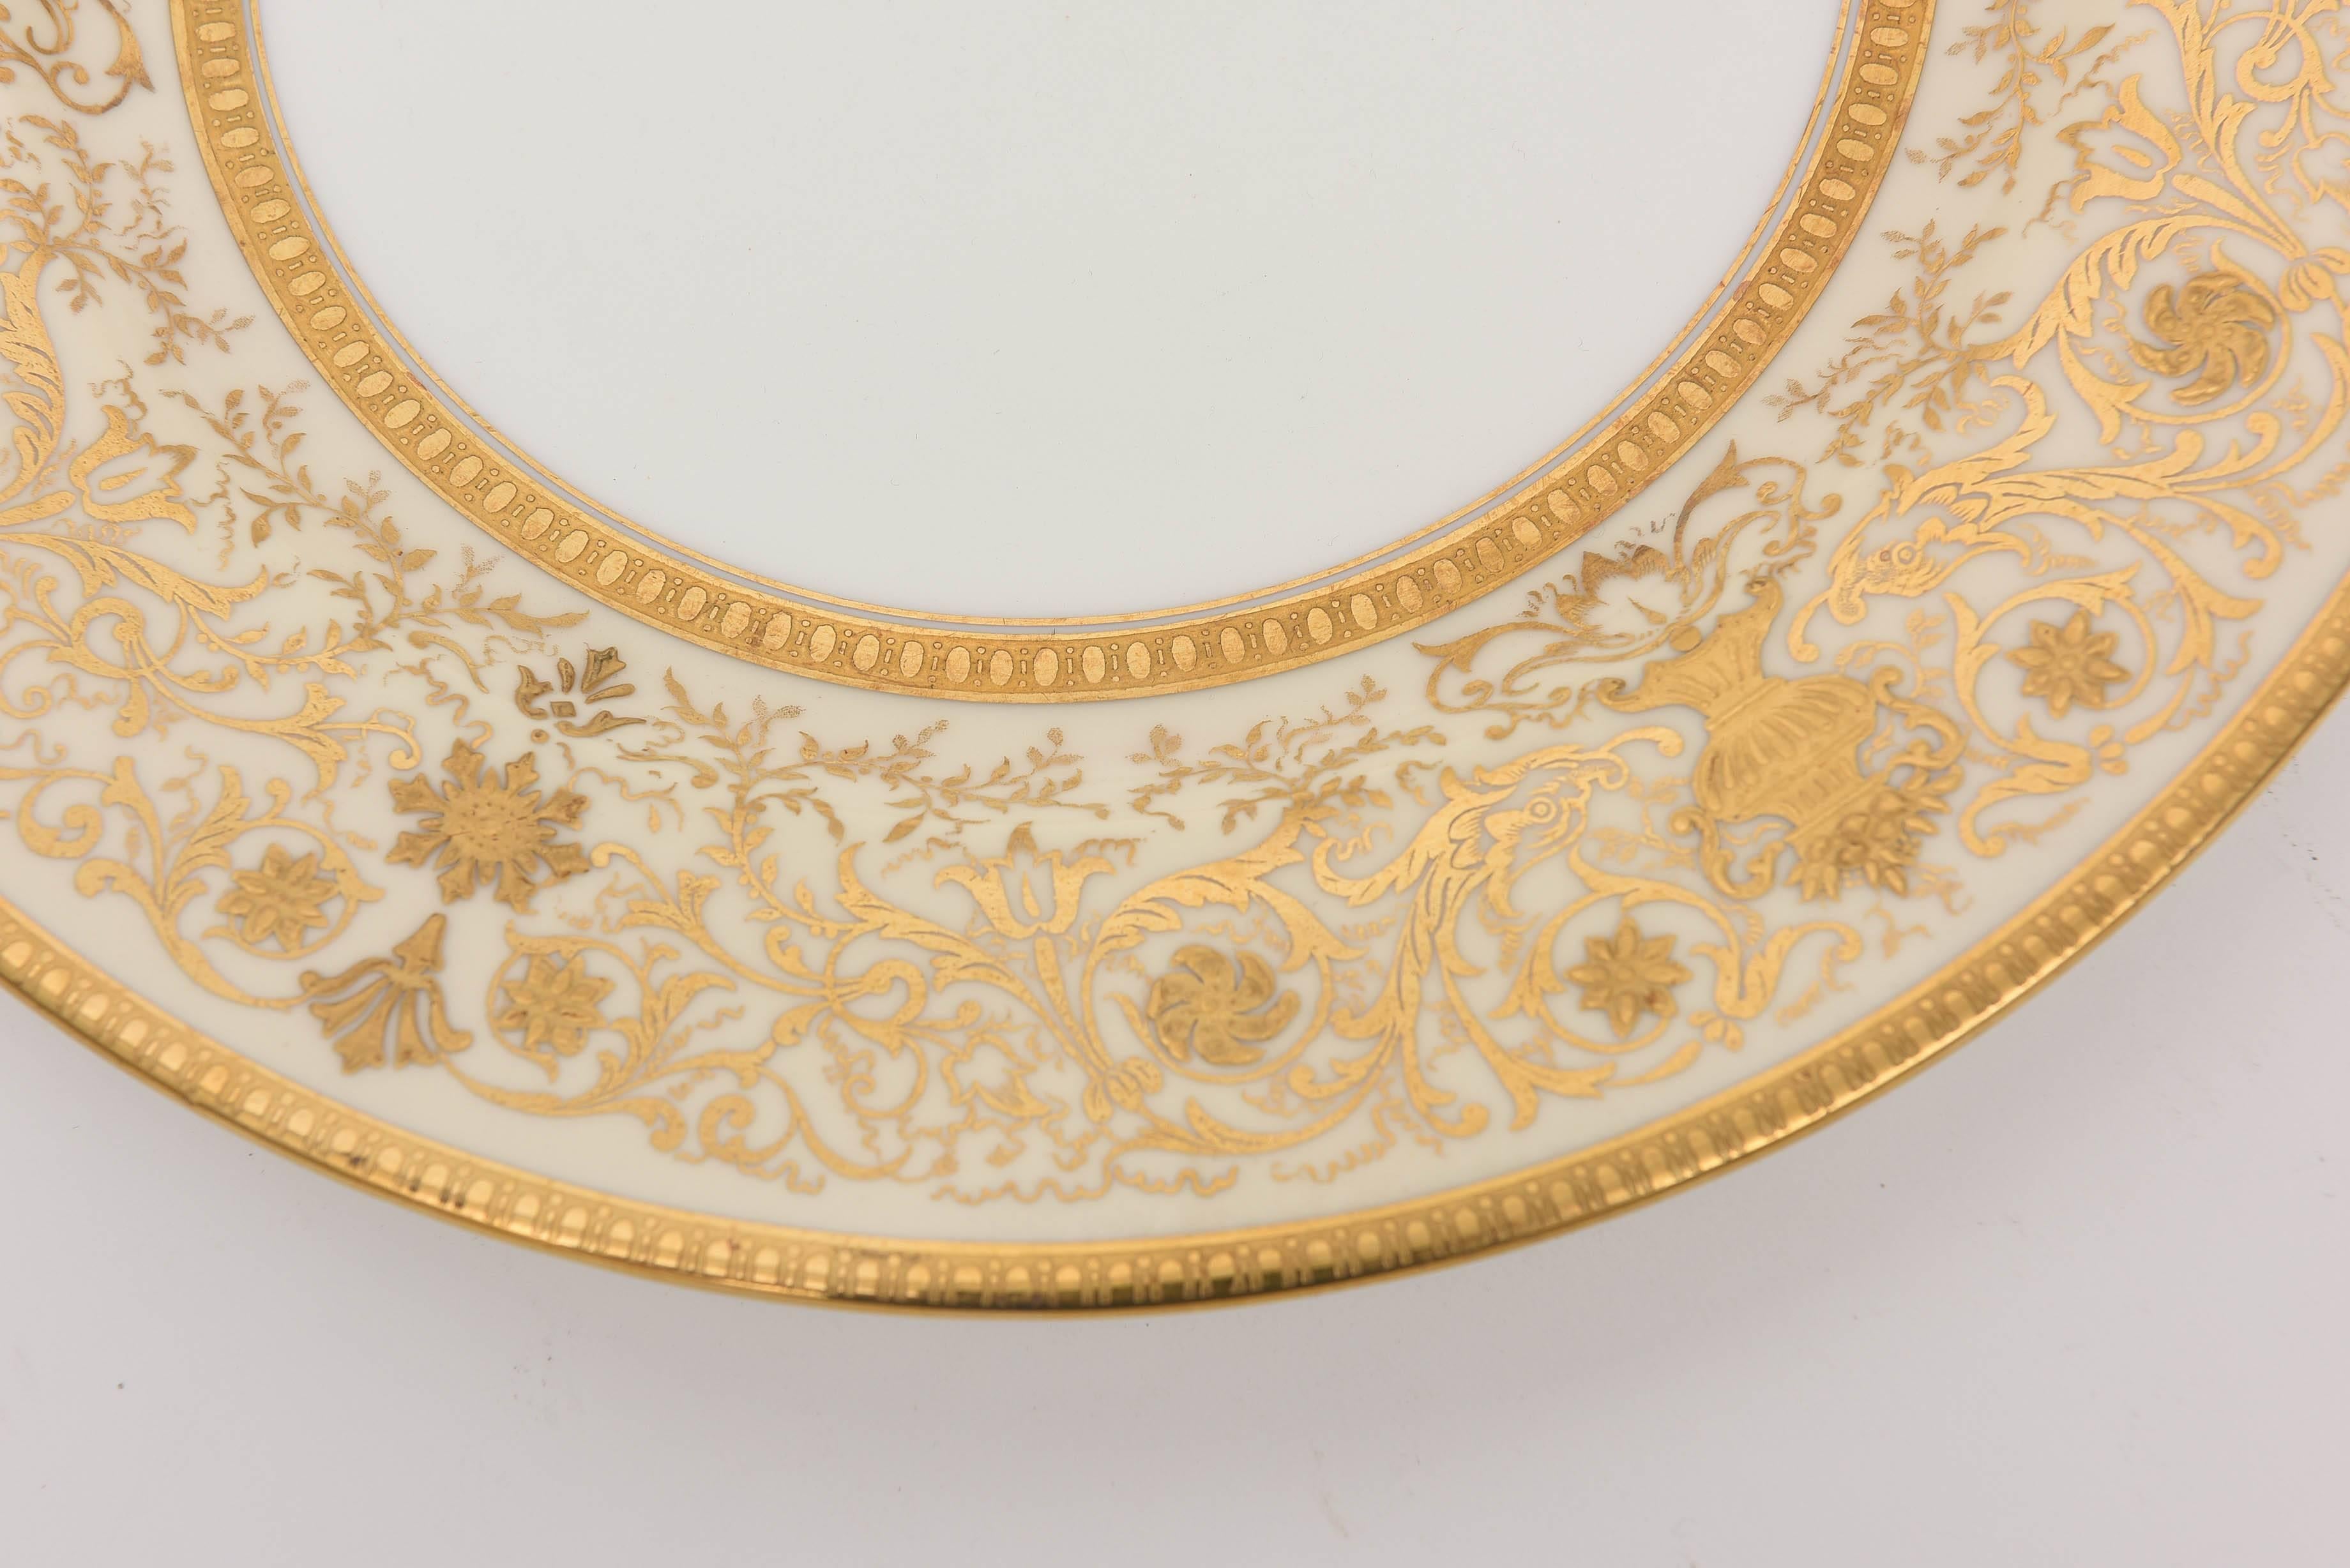 12 Antique English for Tiffany, Gilt Encrusted Plates by Coalport 2